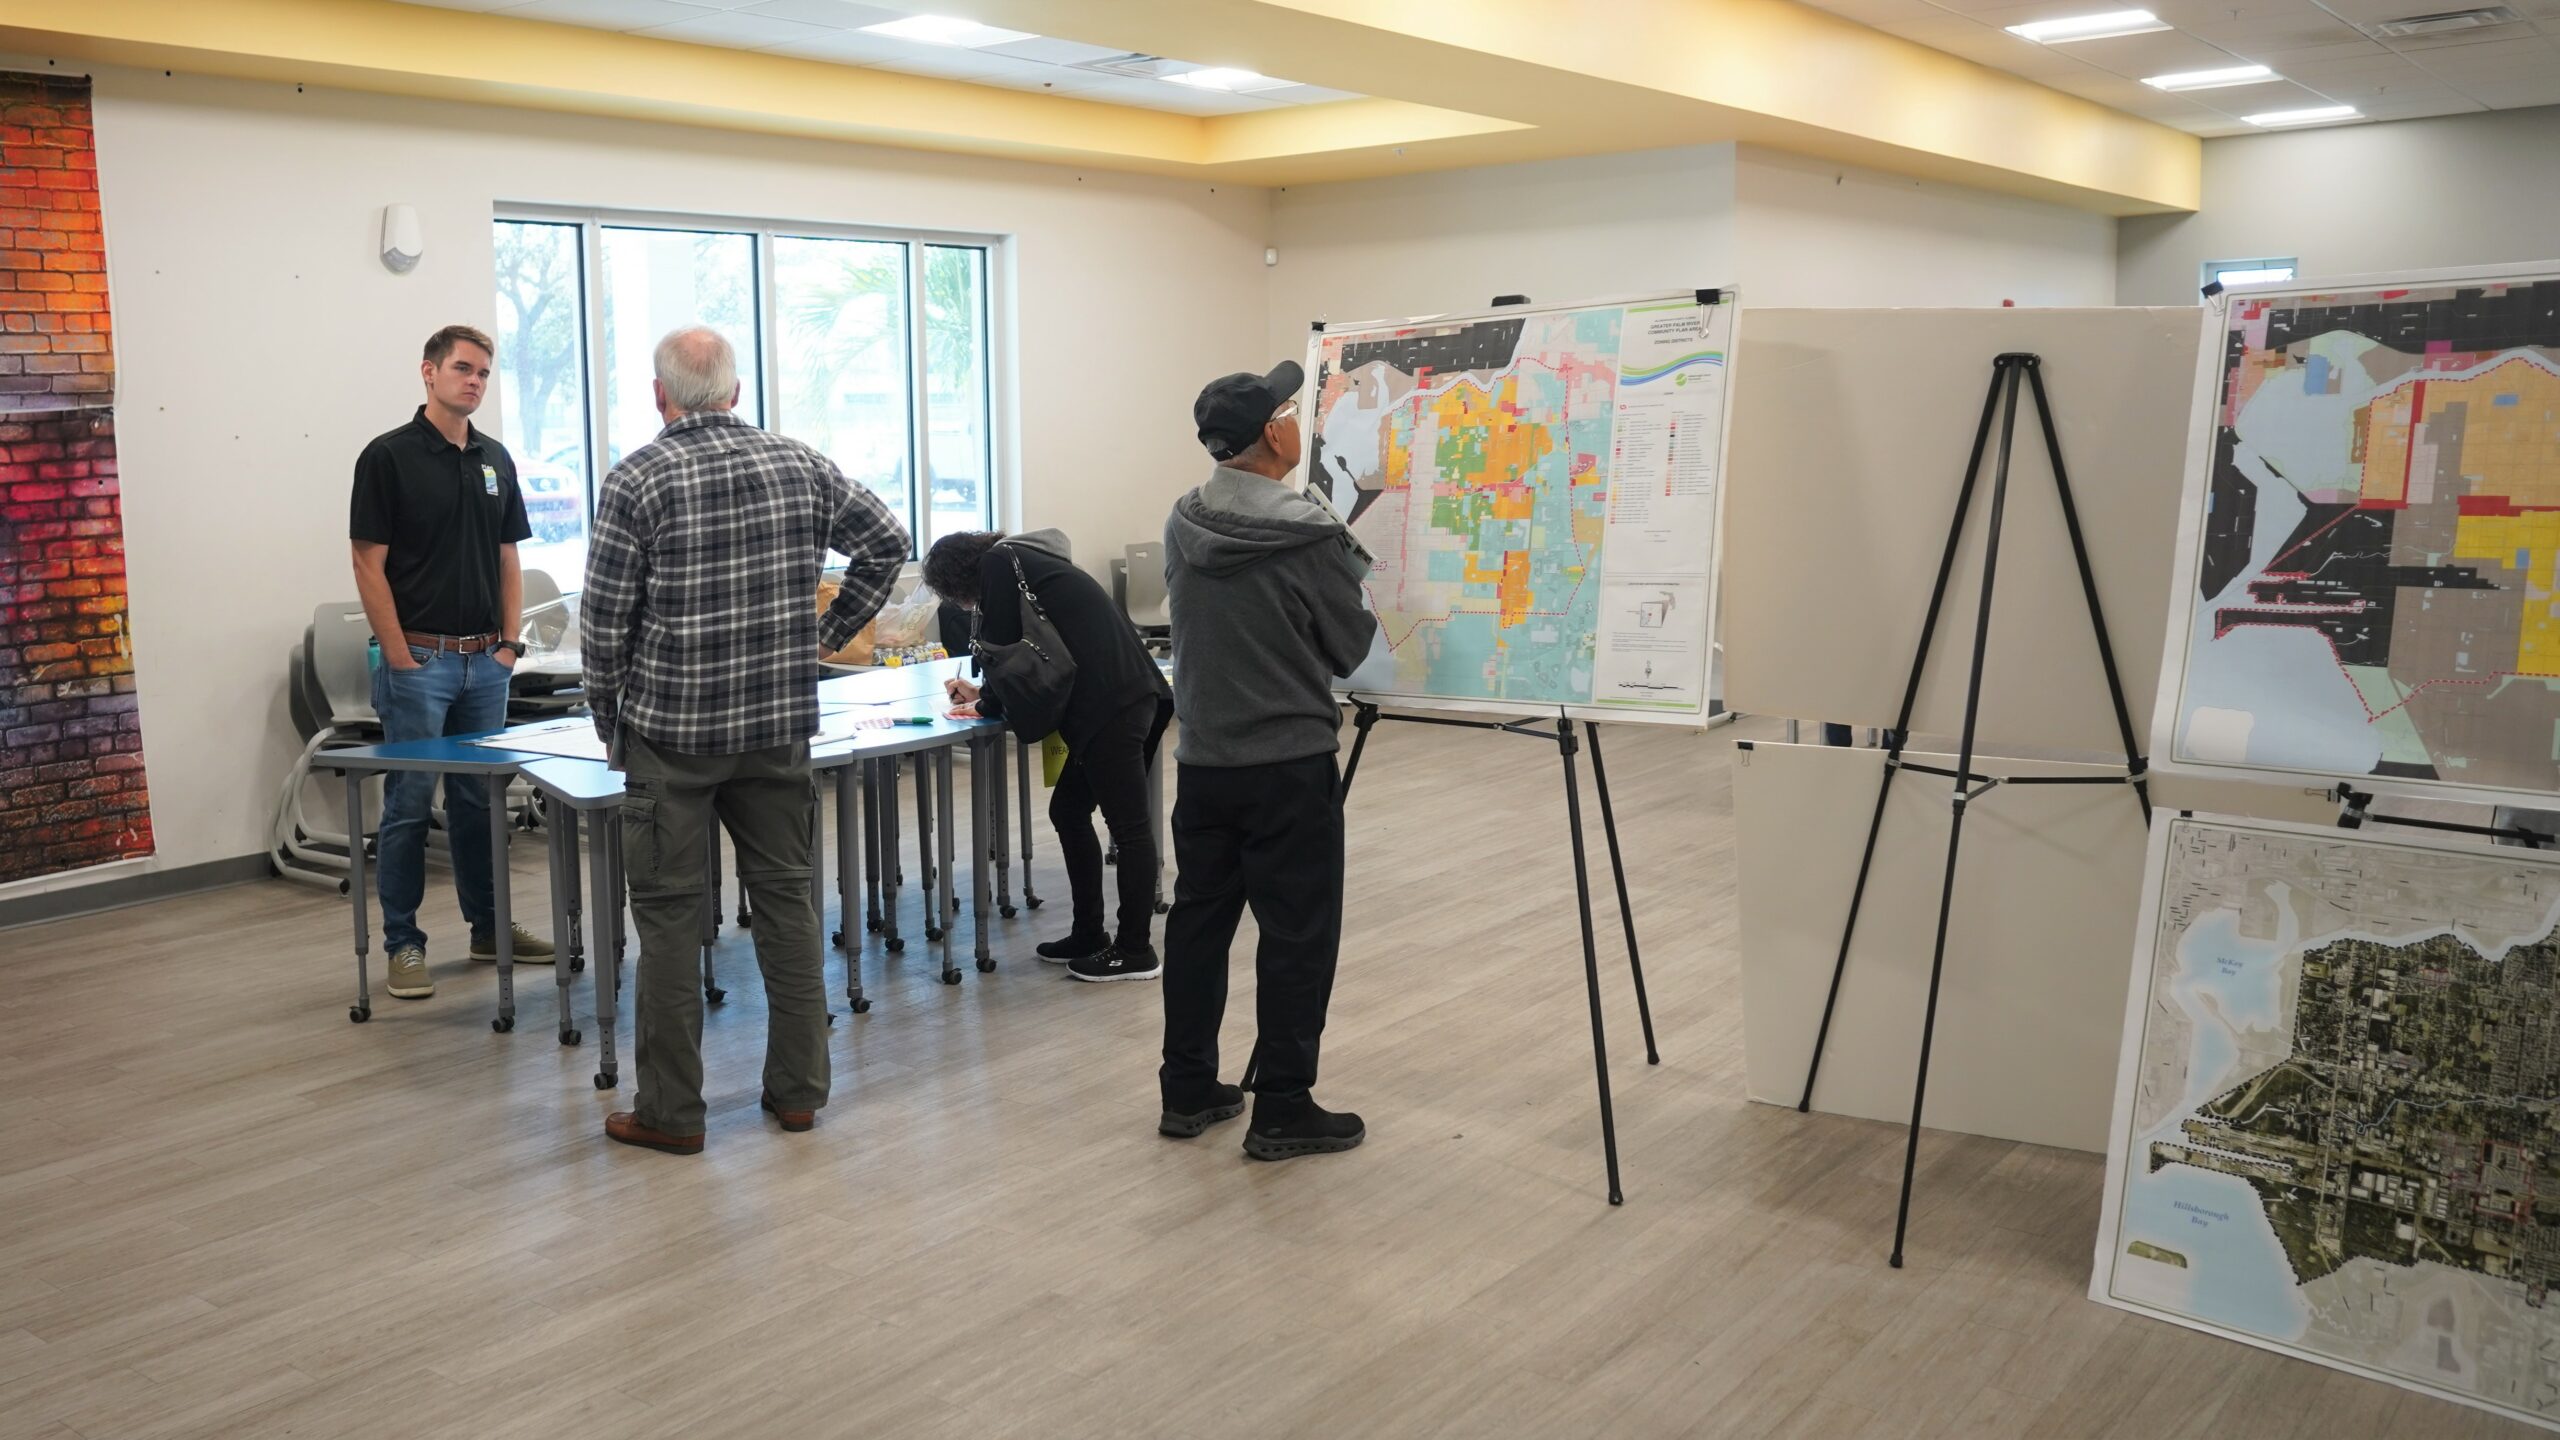 Greater Palm River Area Community Plan Update Open House (November 15, 2022)